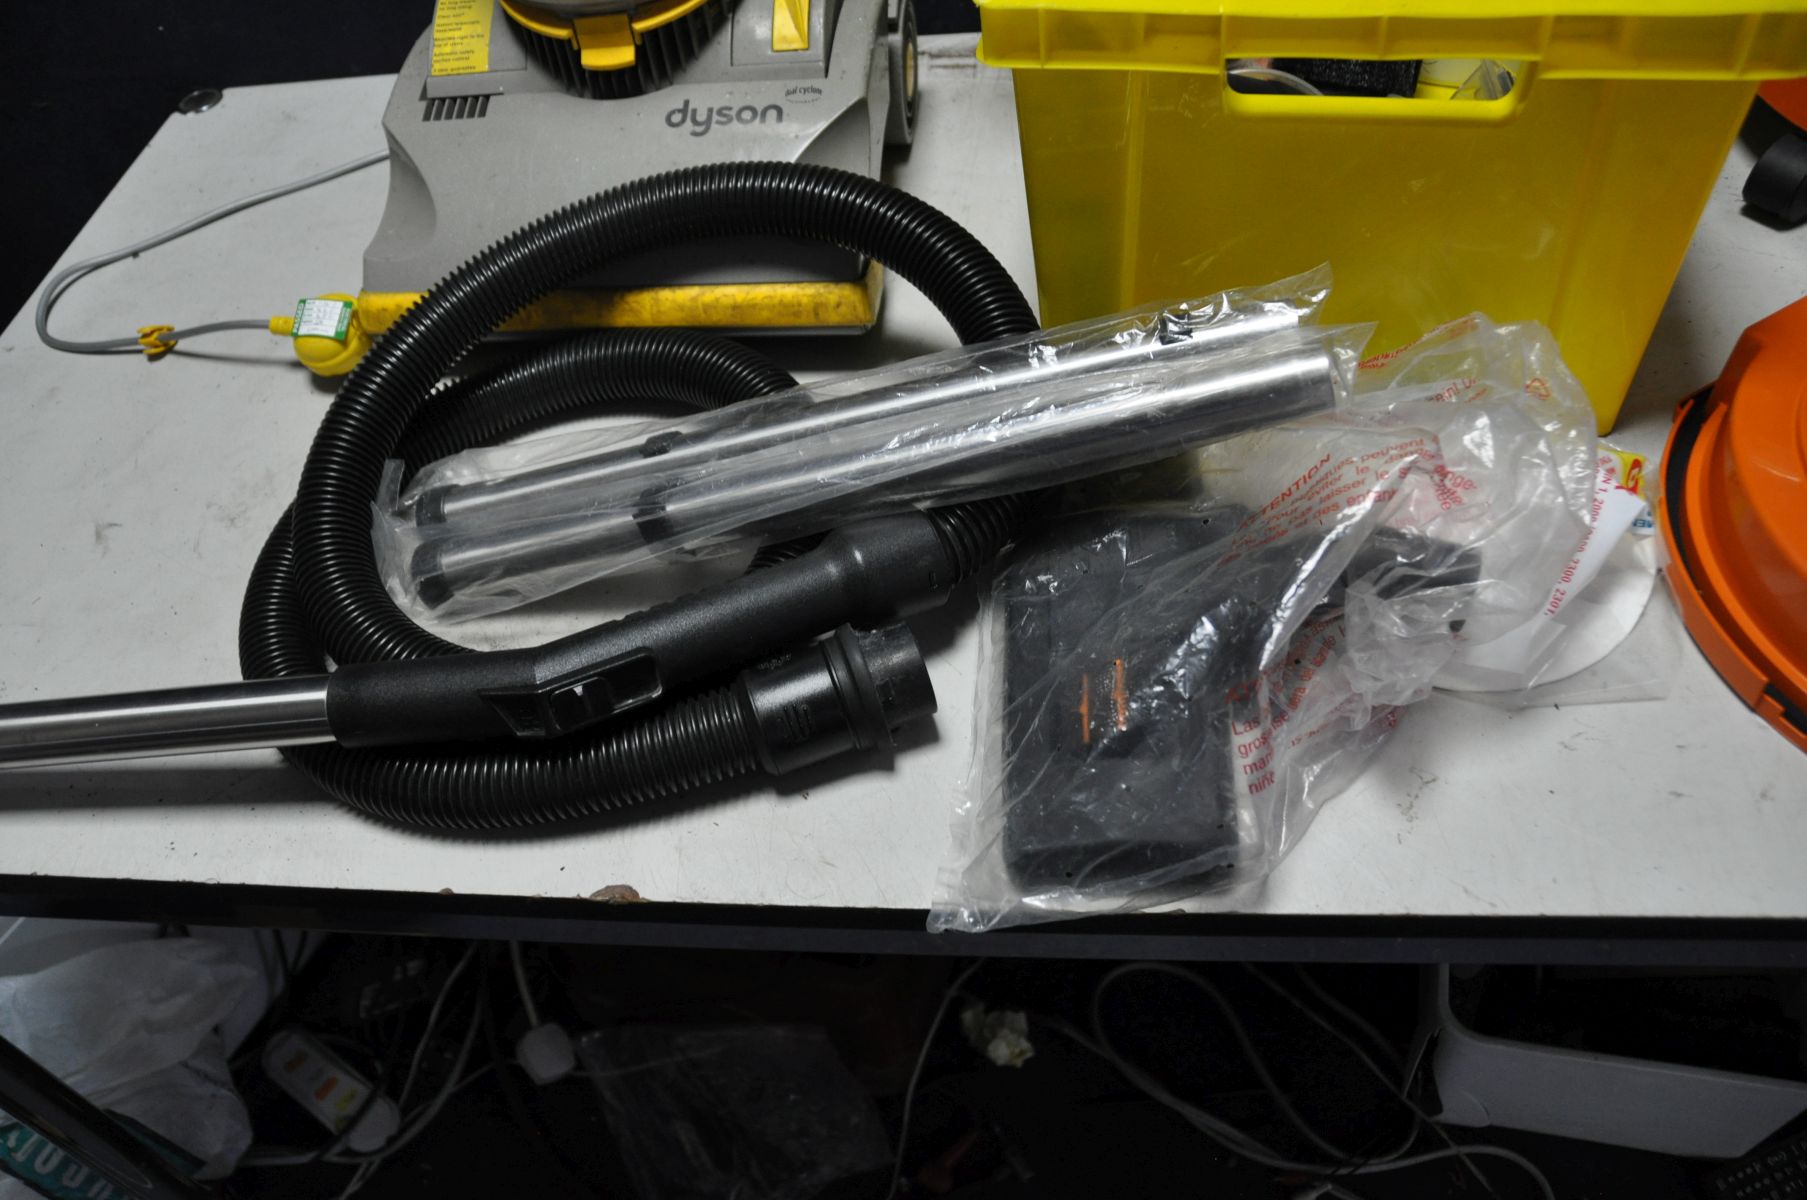 A VAX POWA 4000 WET AND DRY VACUUM CLEANER with tray of accessories and a Dyson DC01 vacuum - Image 4 of 5